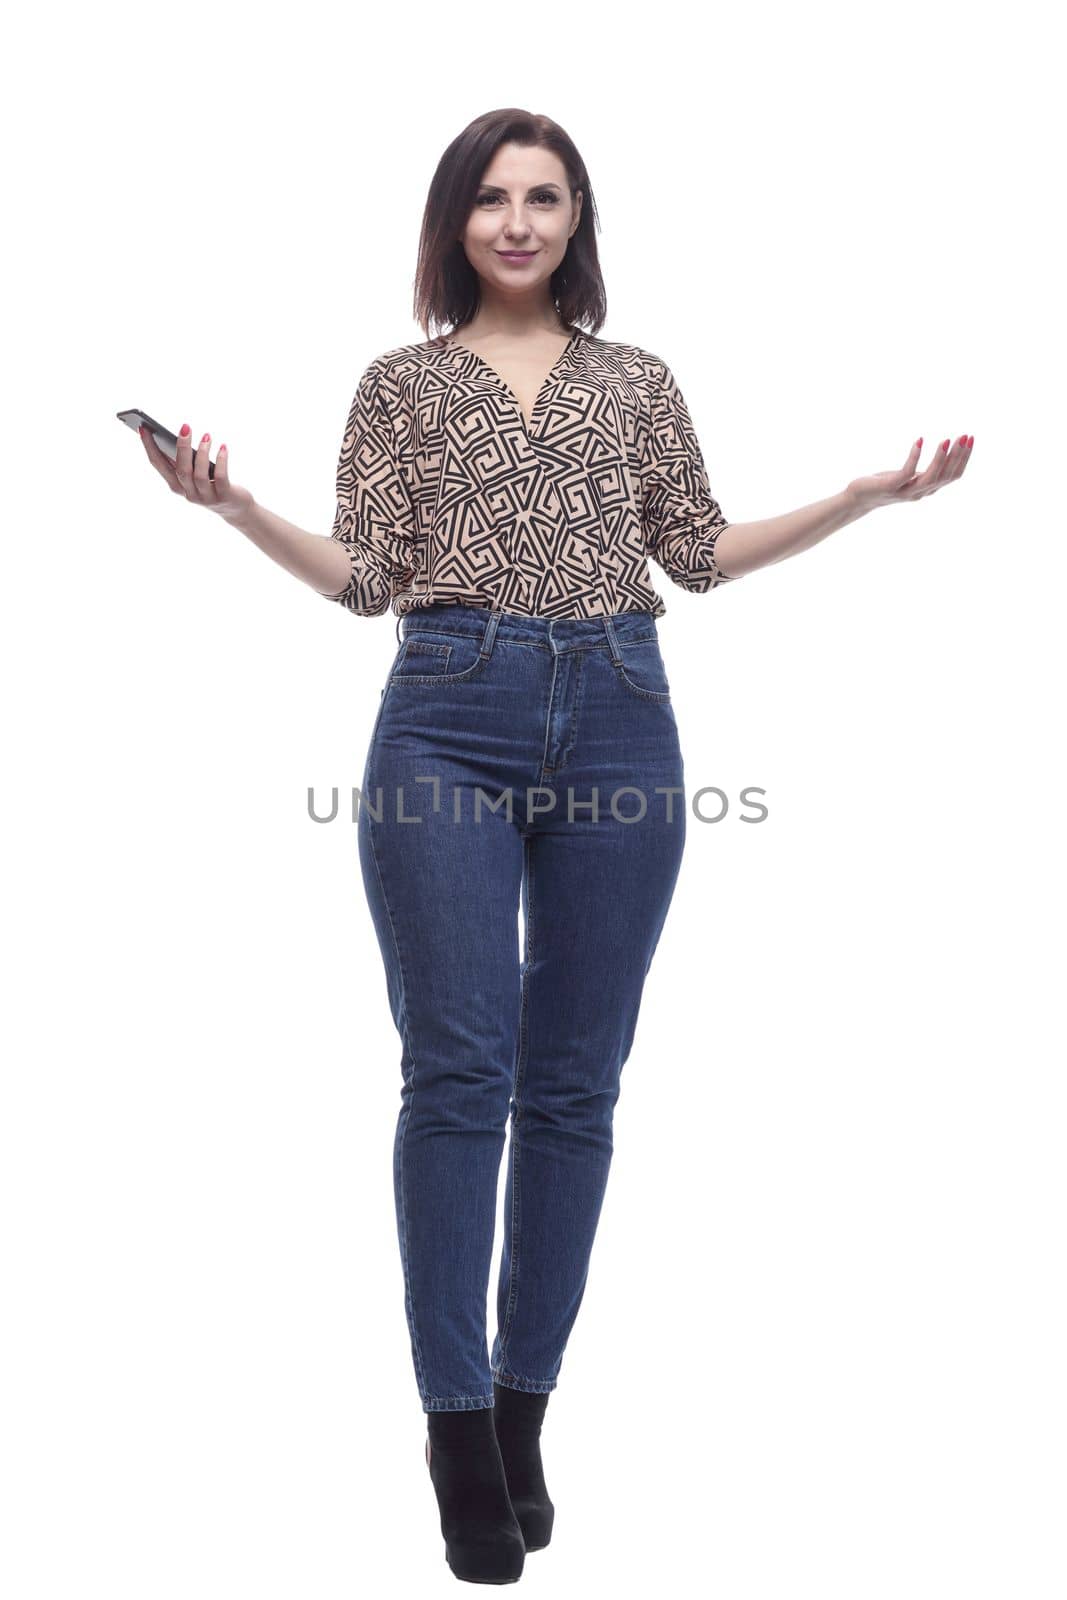 in full growth. attractive young woman with a smartphone. isolated on a white background.